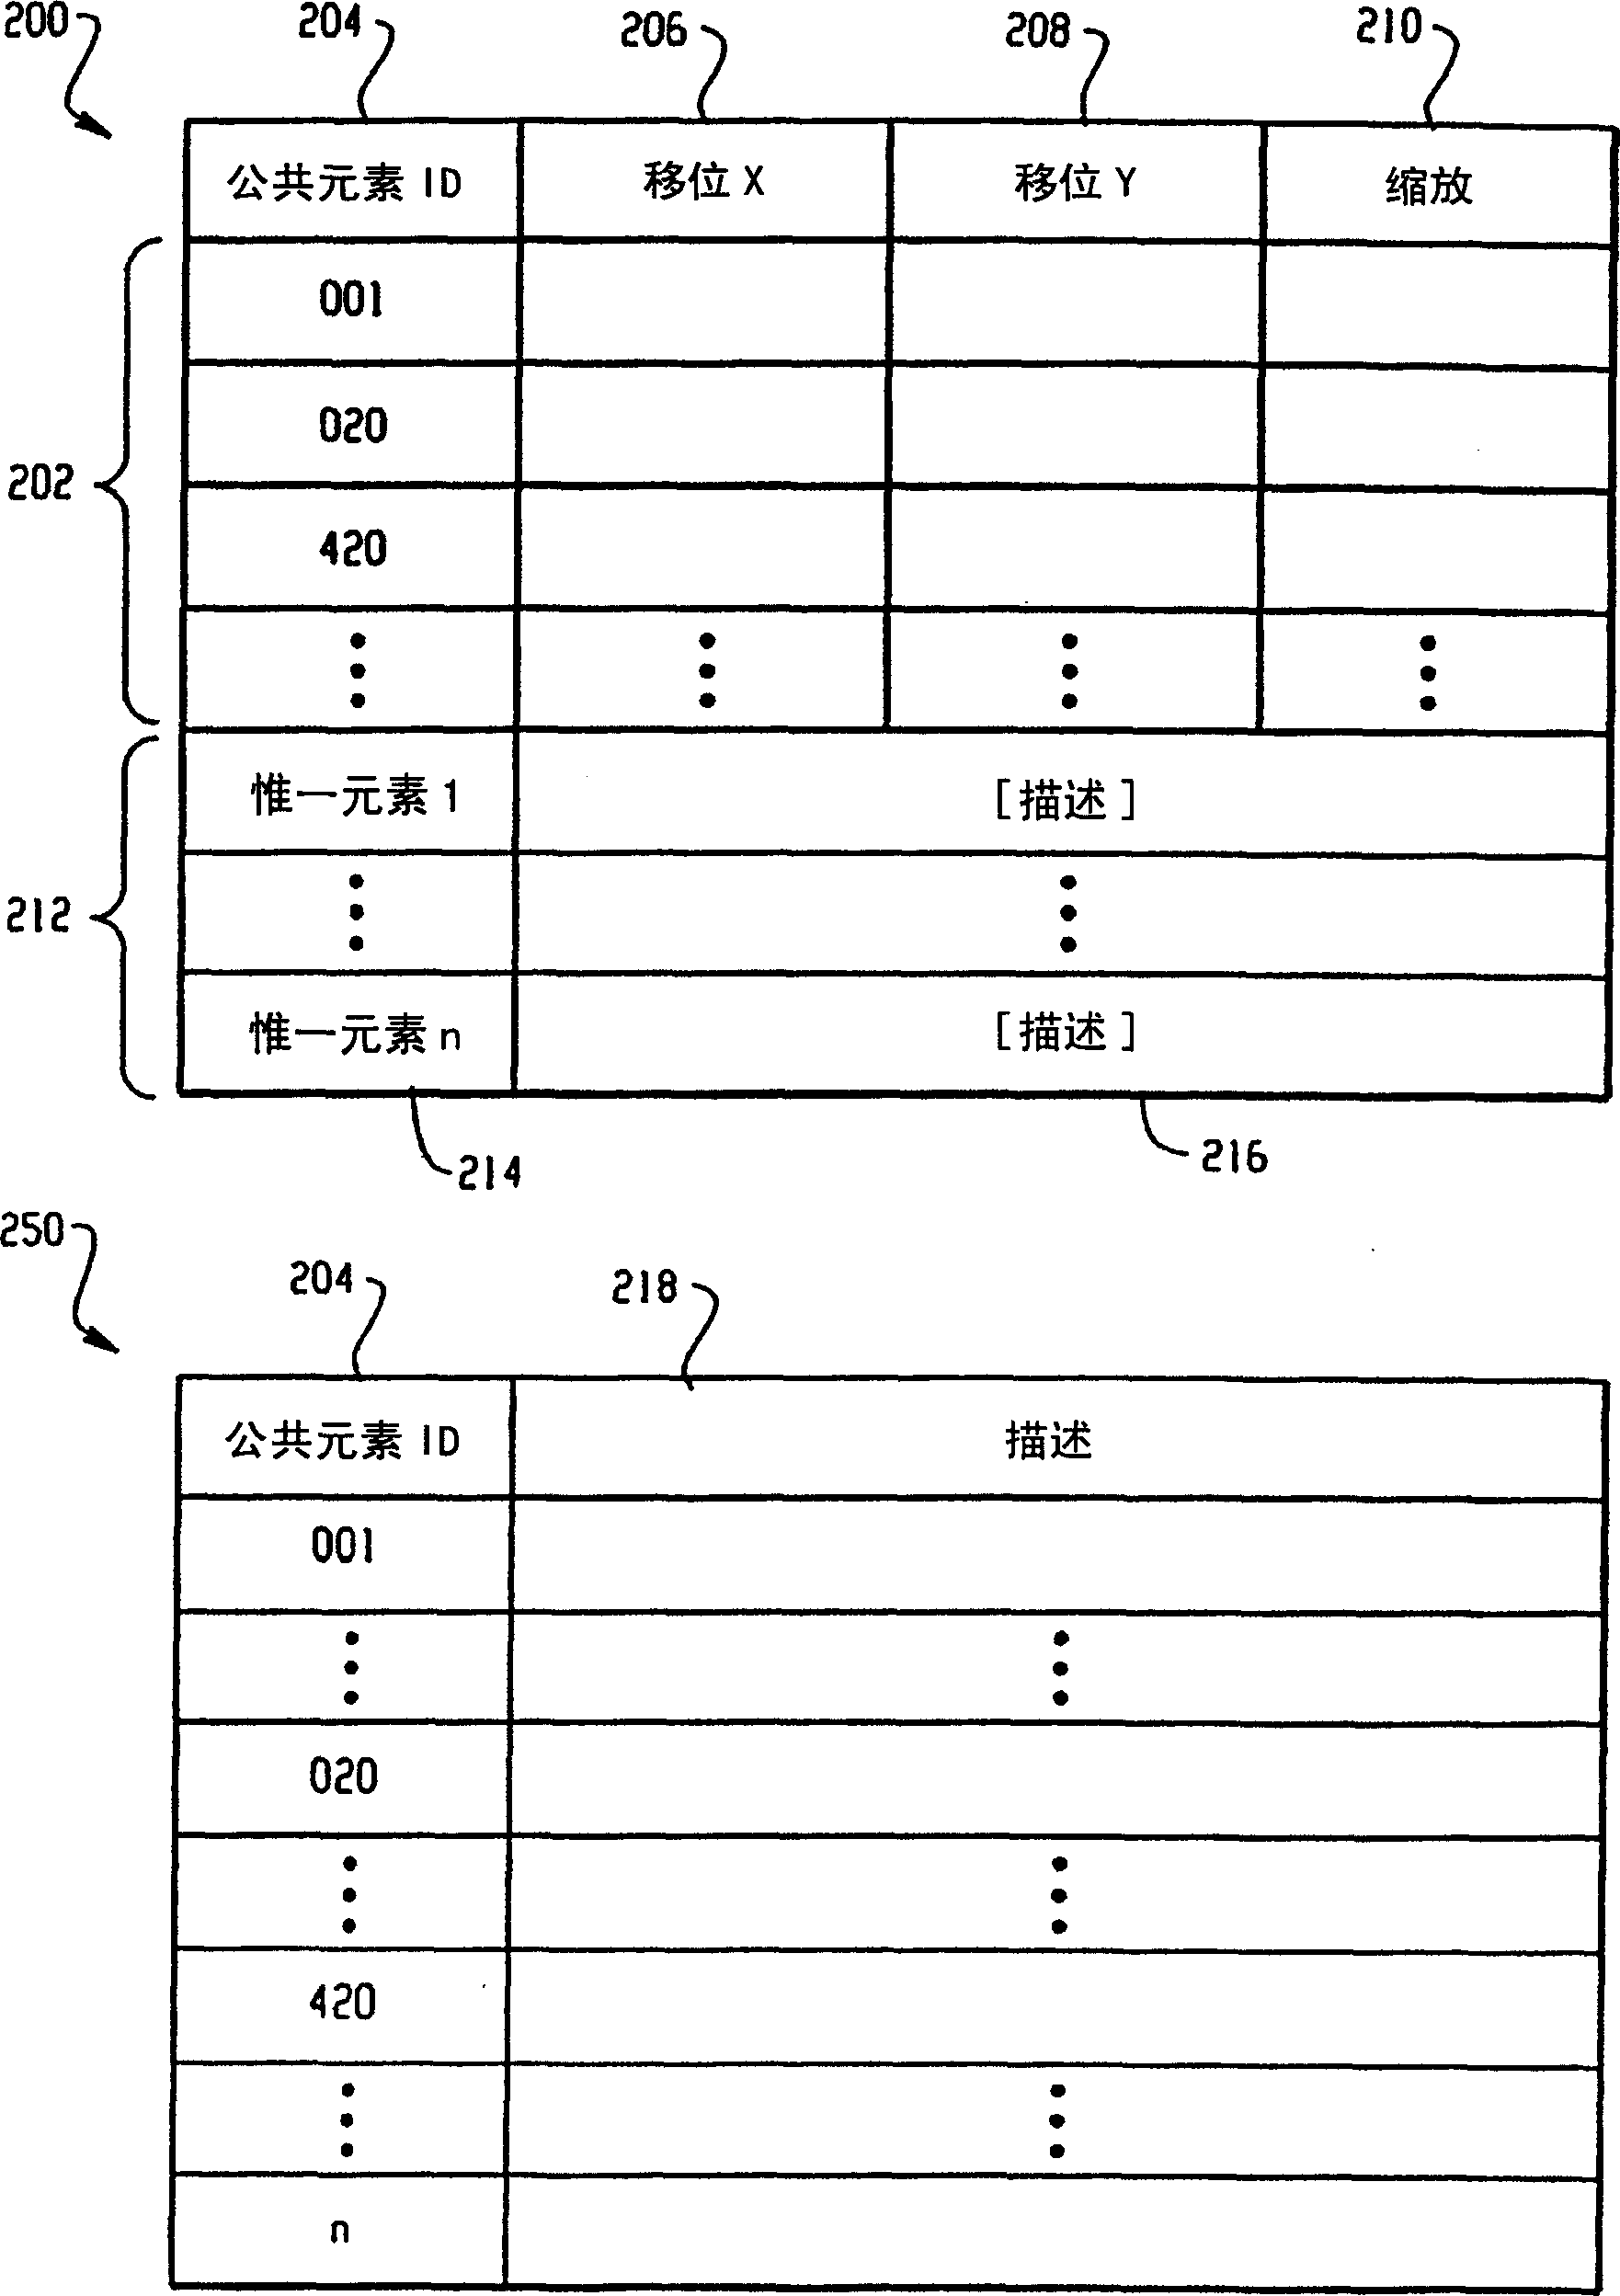 Scalable stroke font system and method